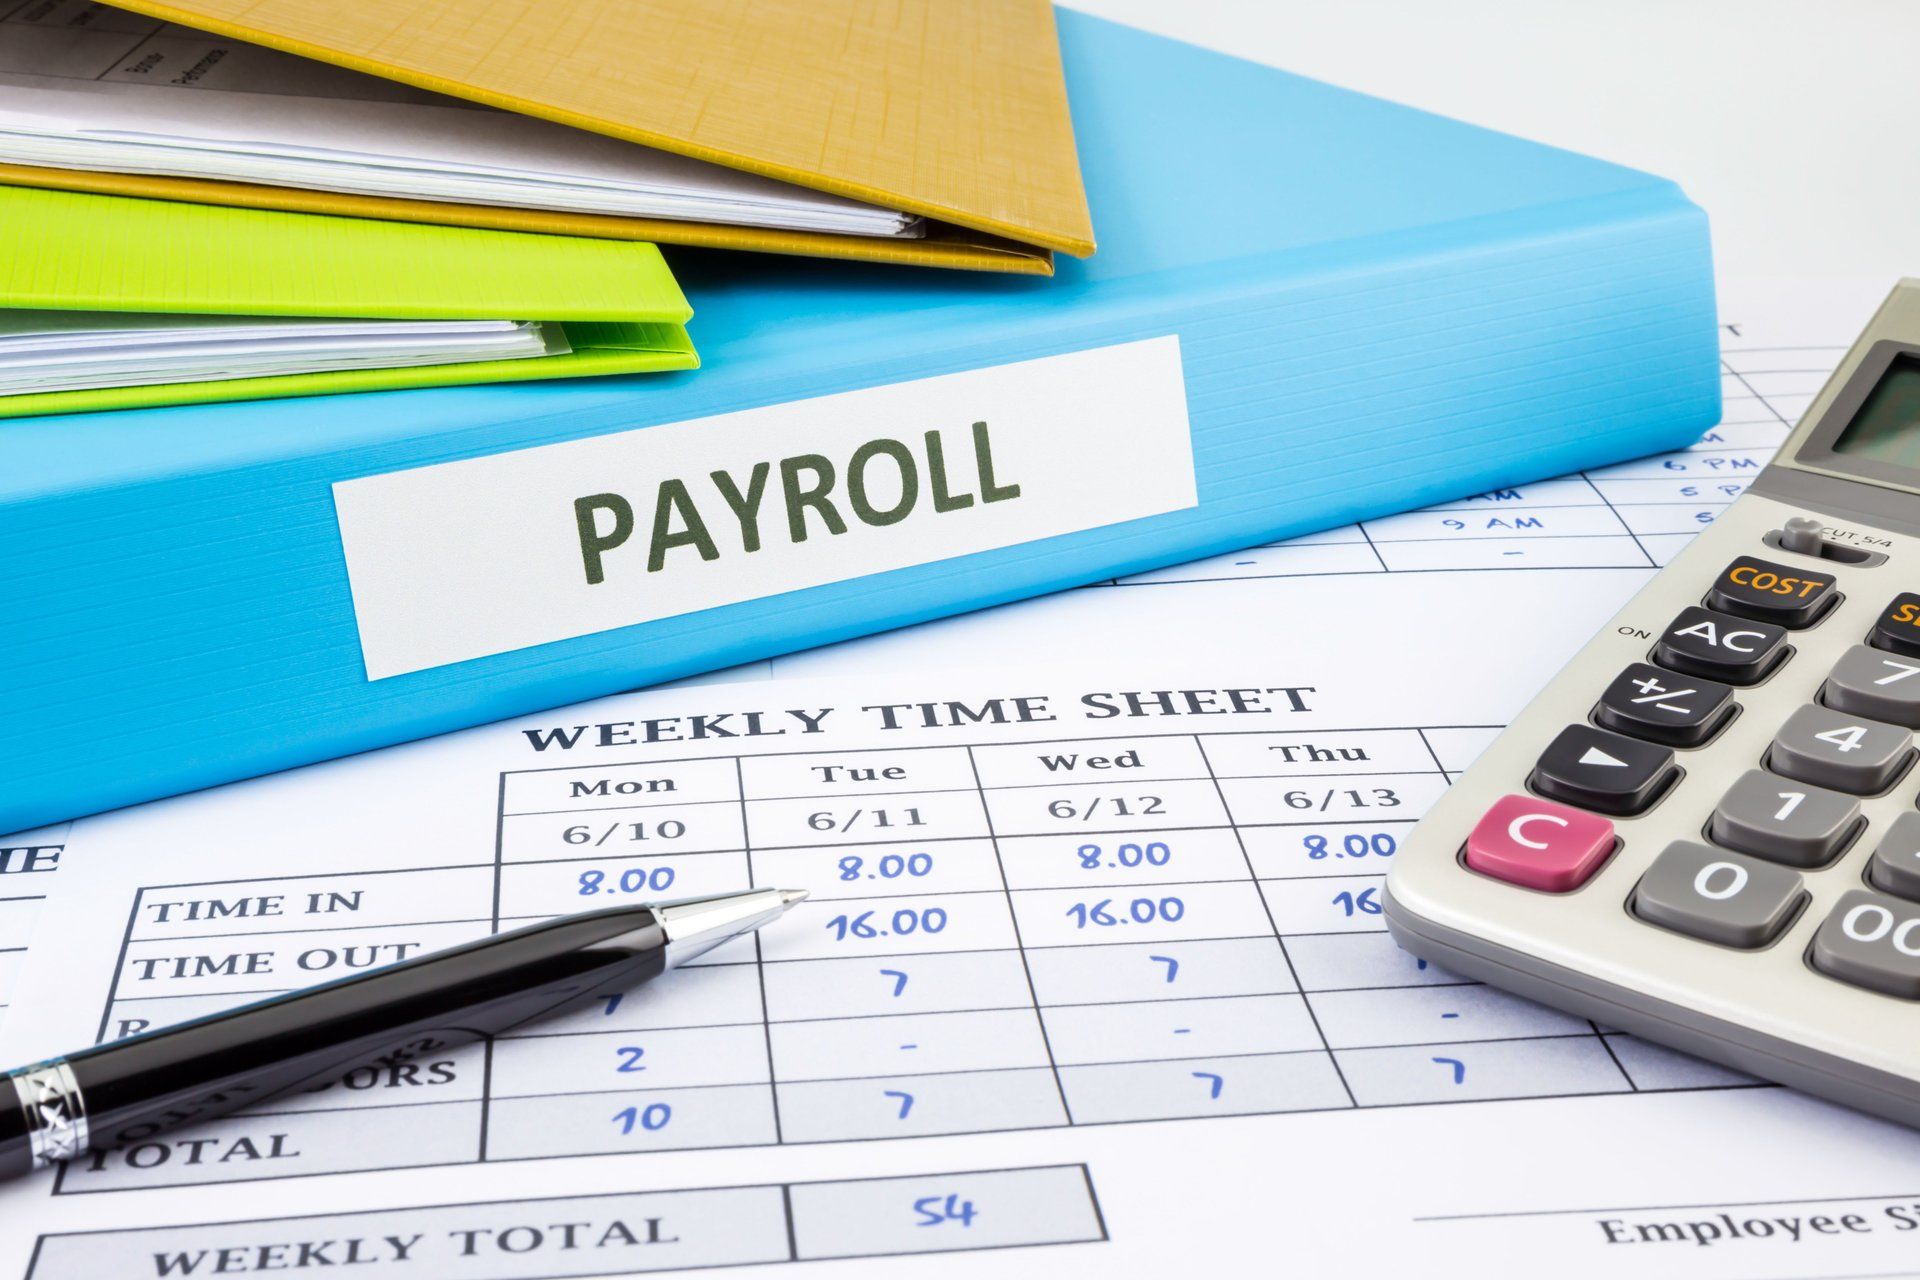 Payroll tax payments and fillings